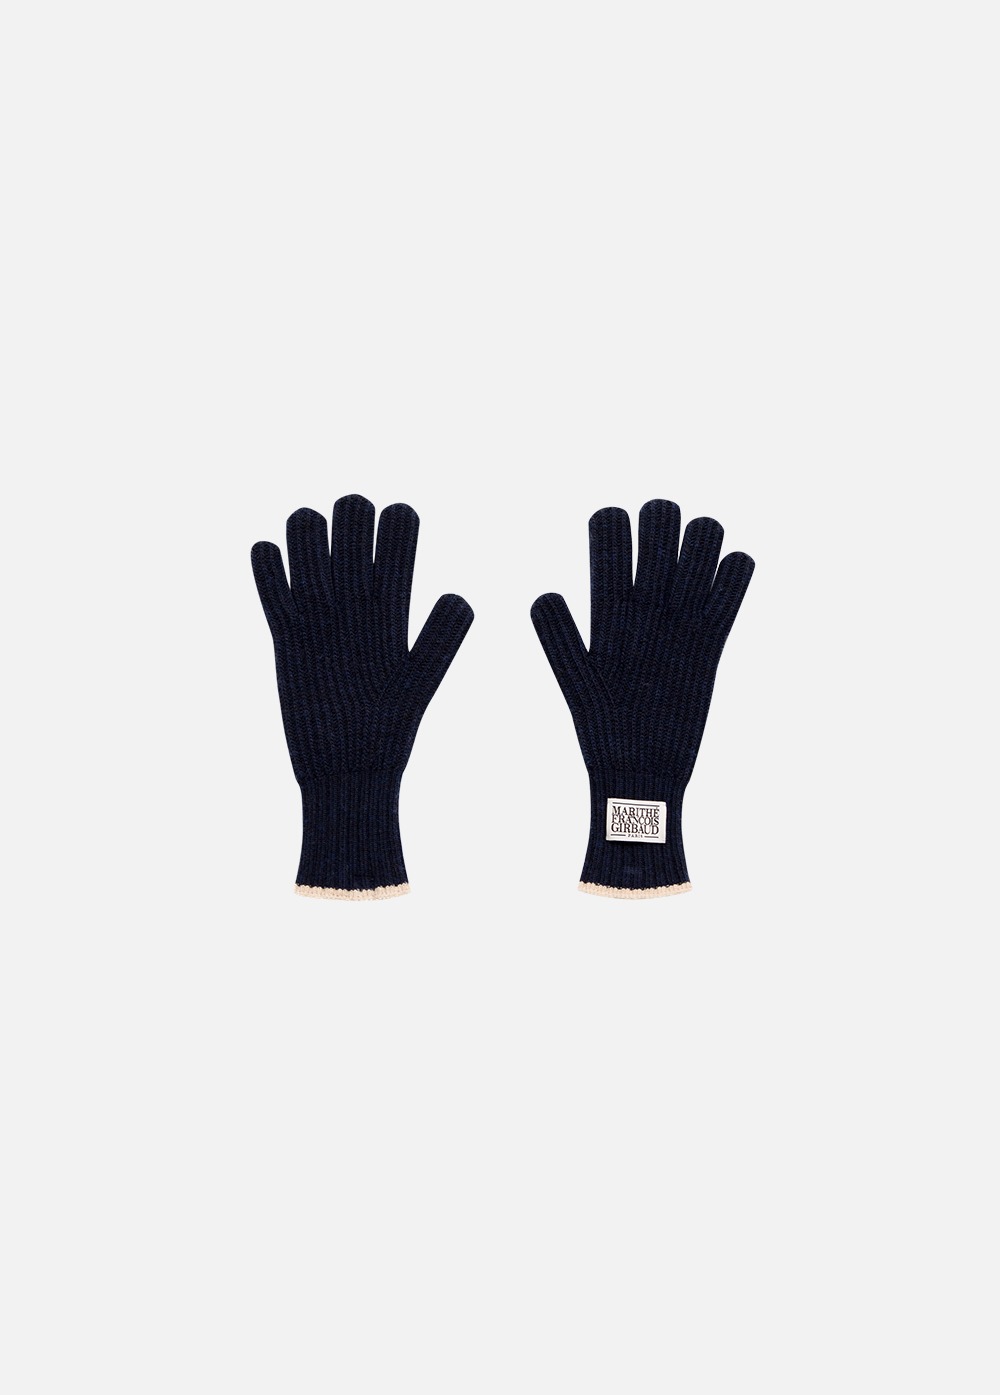 CLASSIC LOGO COLOR GLOVE navy